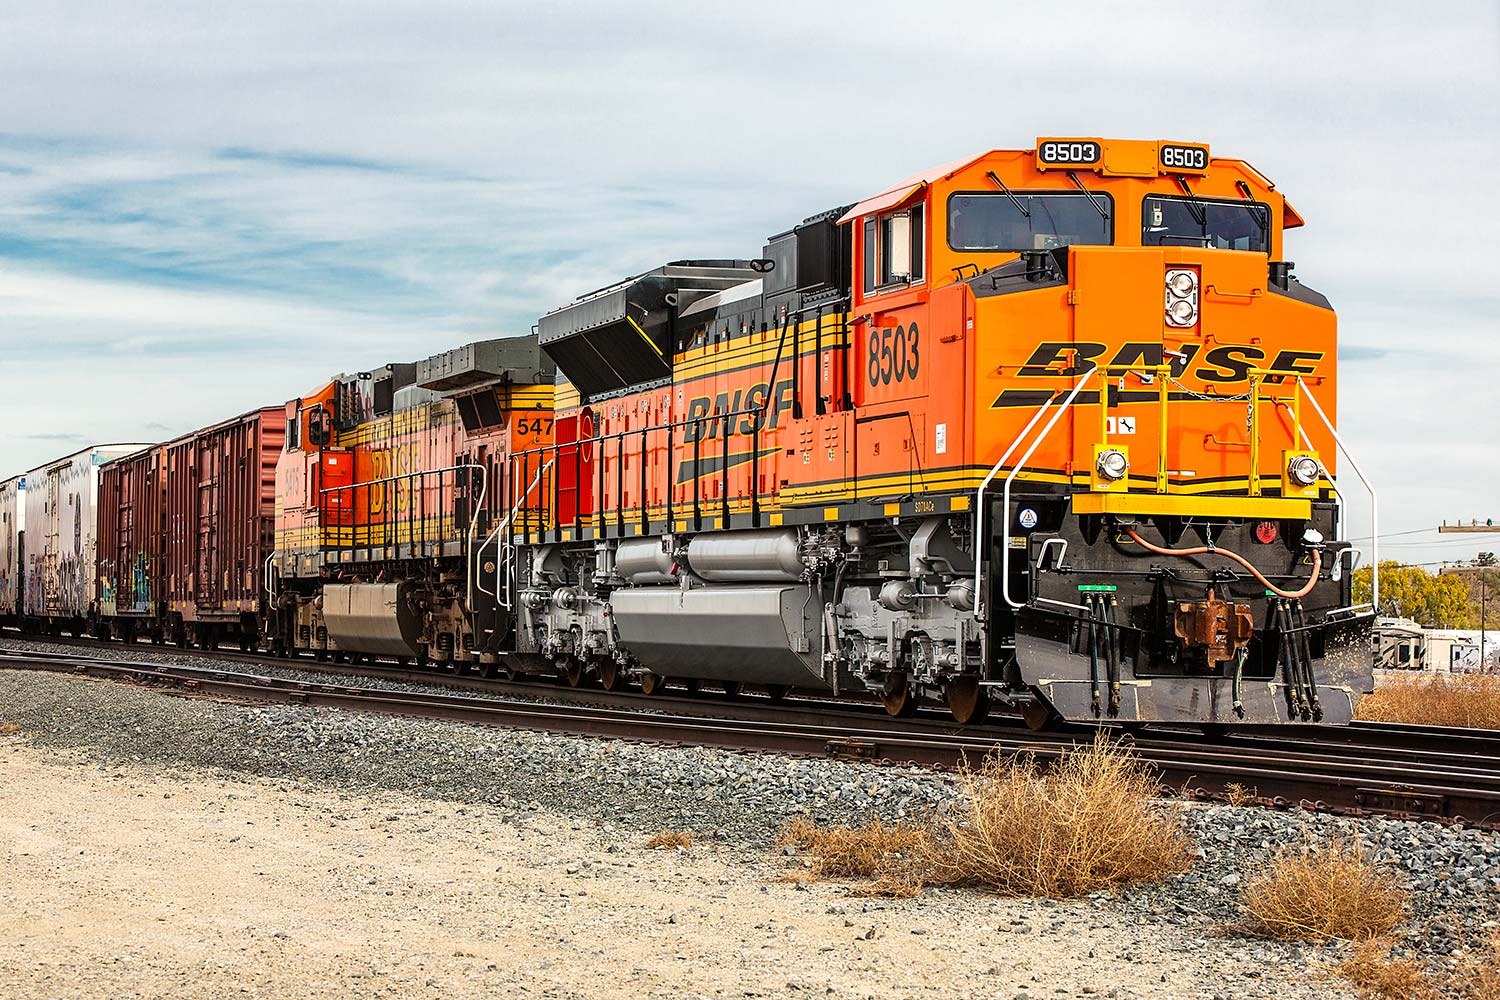 20+ photos of railroads and trains